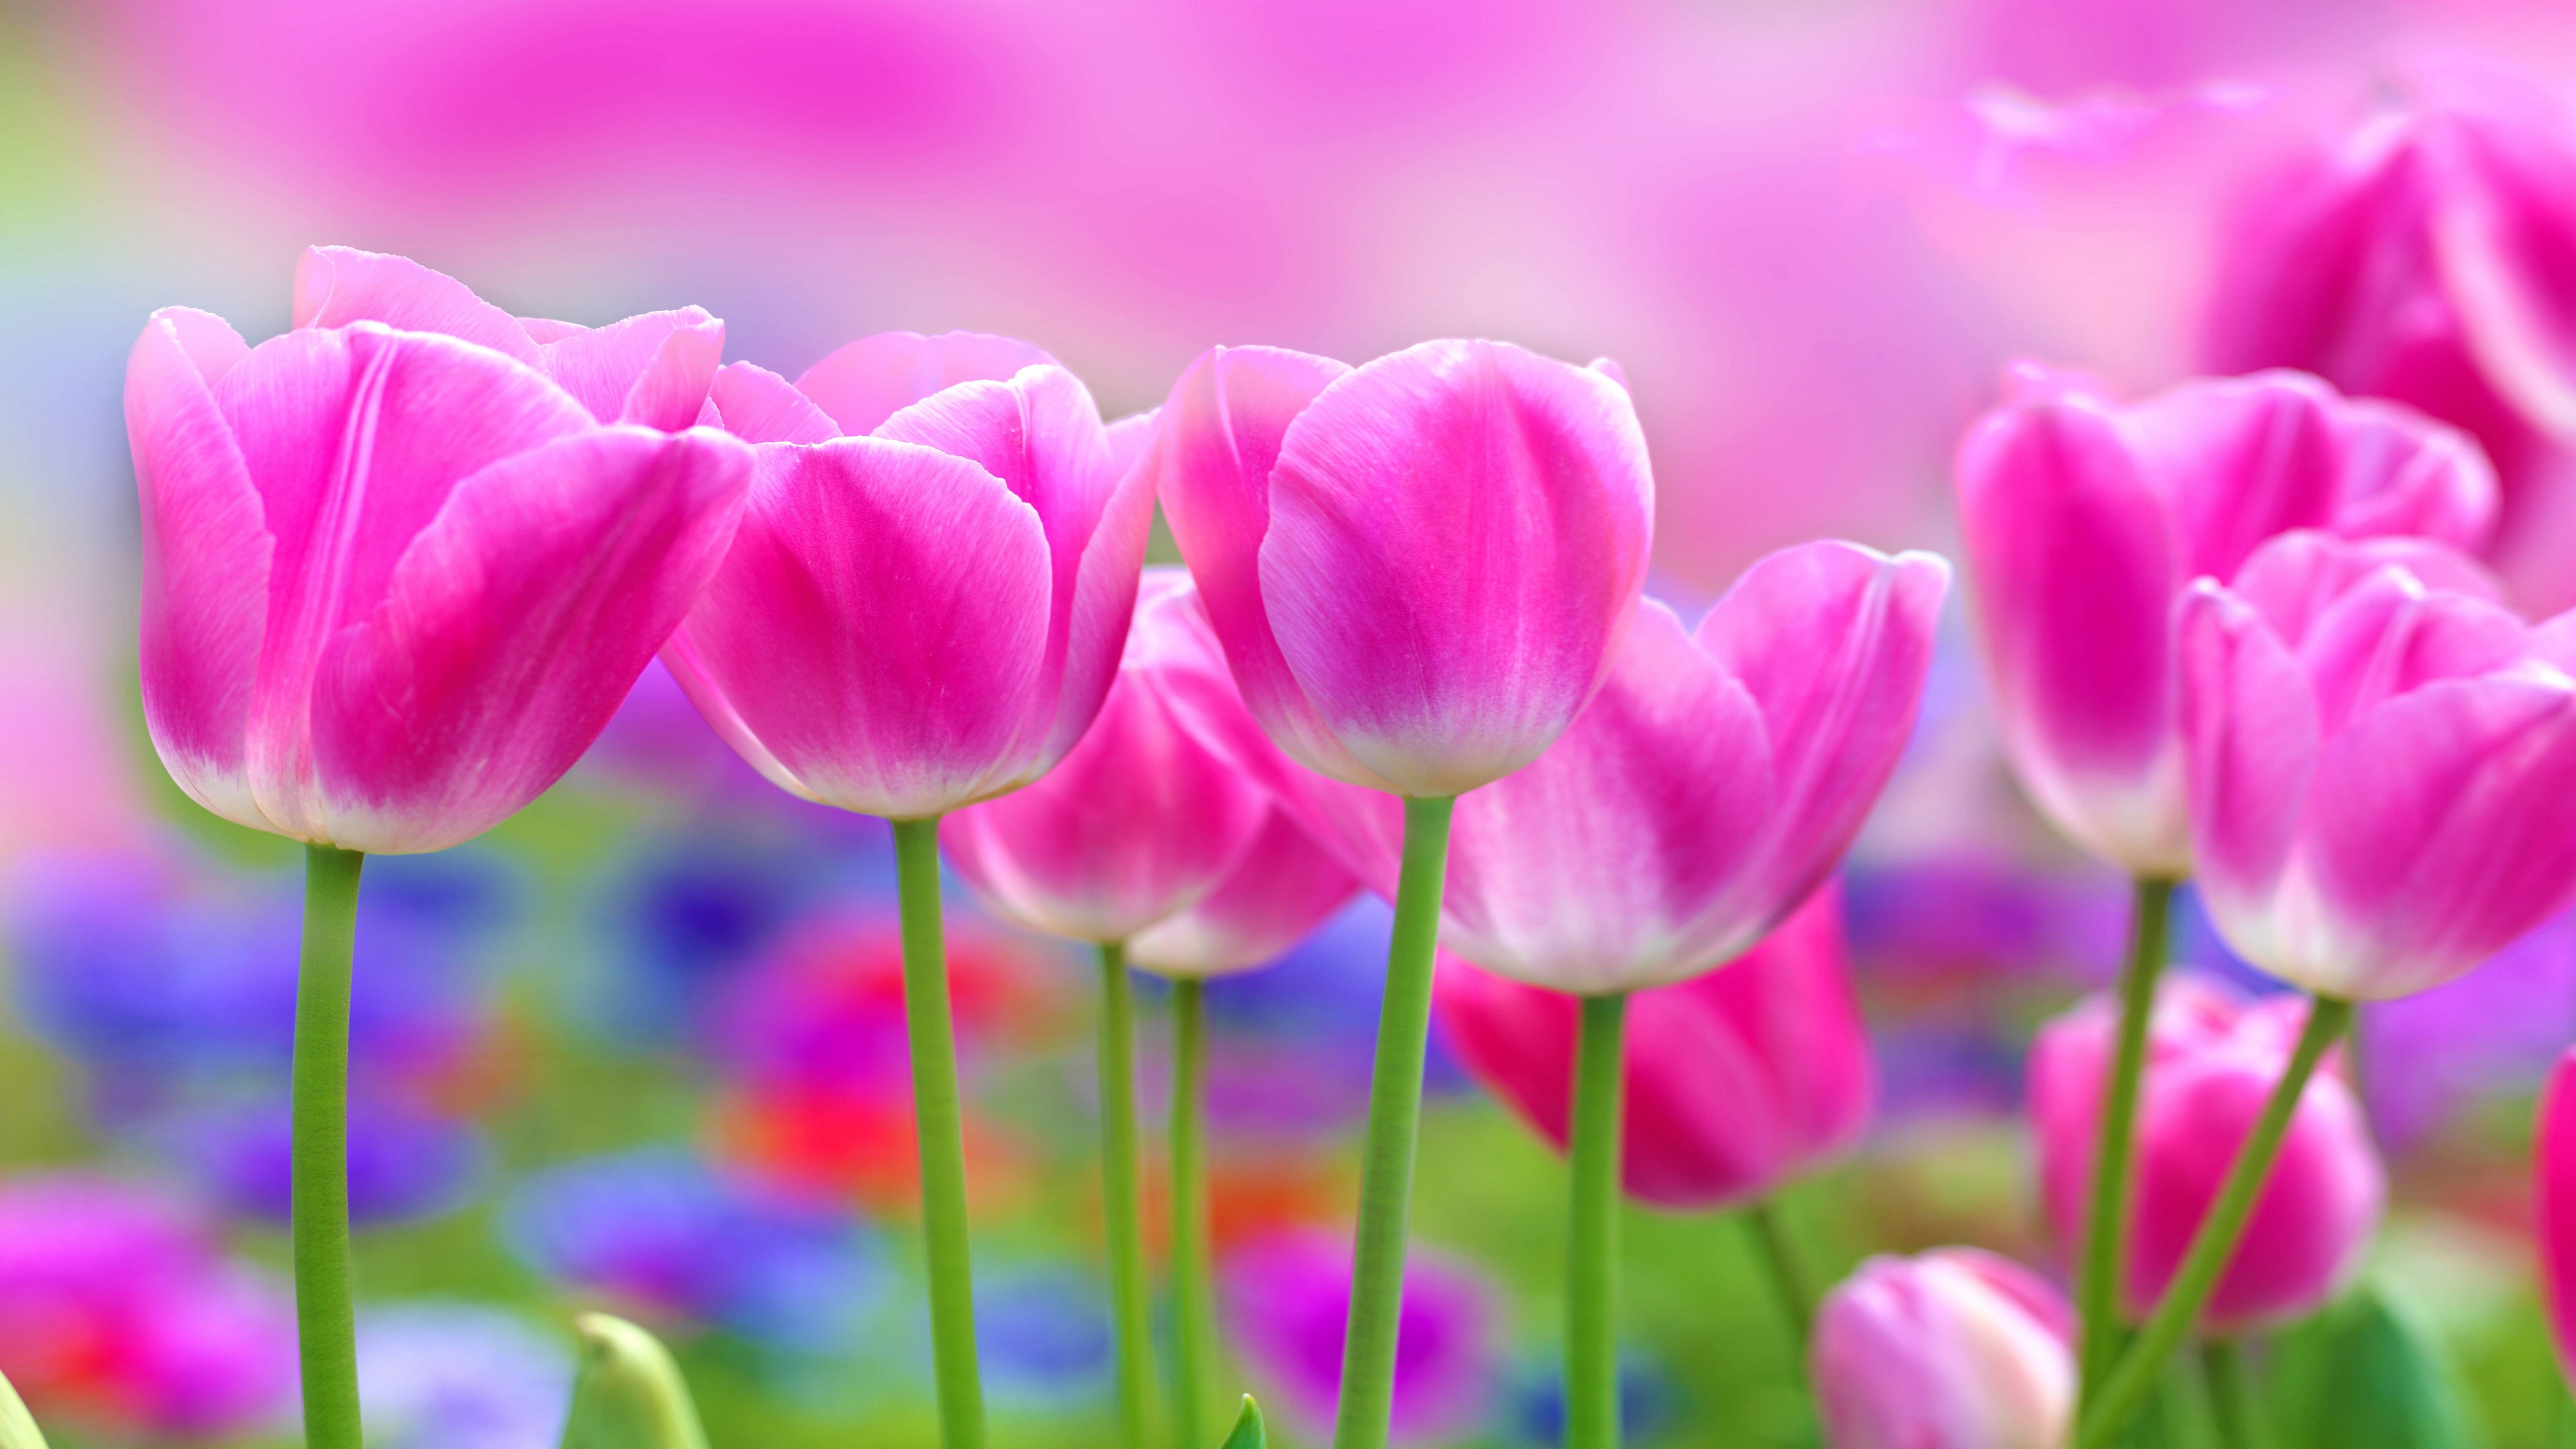 Pink Tulips for 5120 x 2880 5K Ultra HD resolution